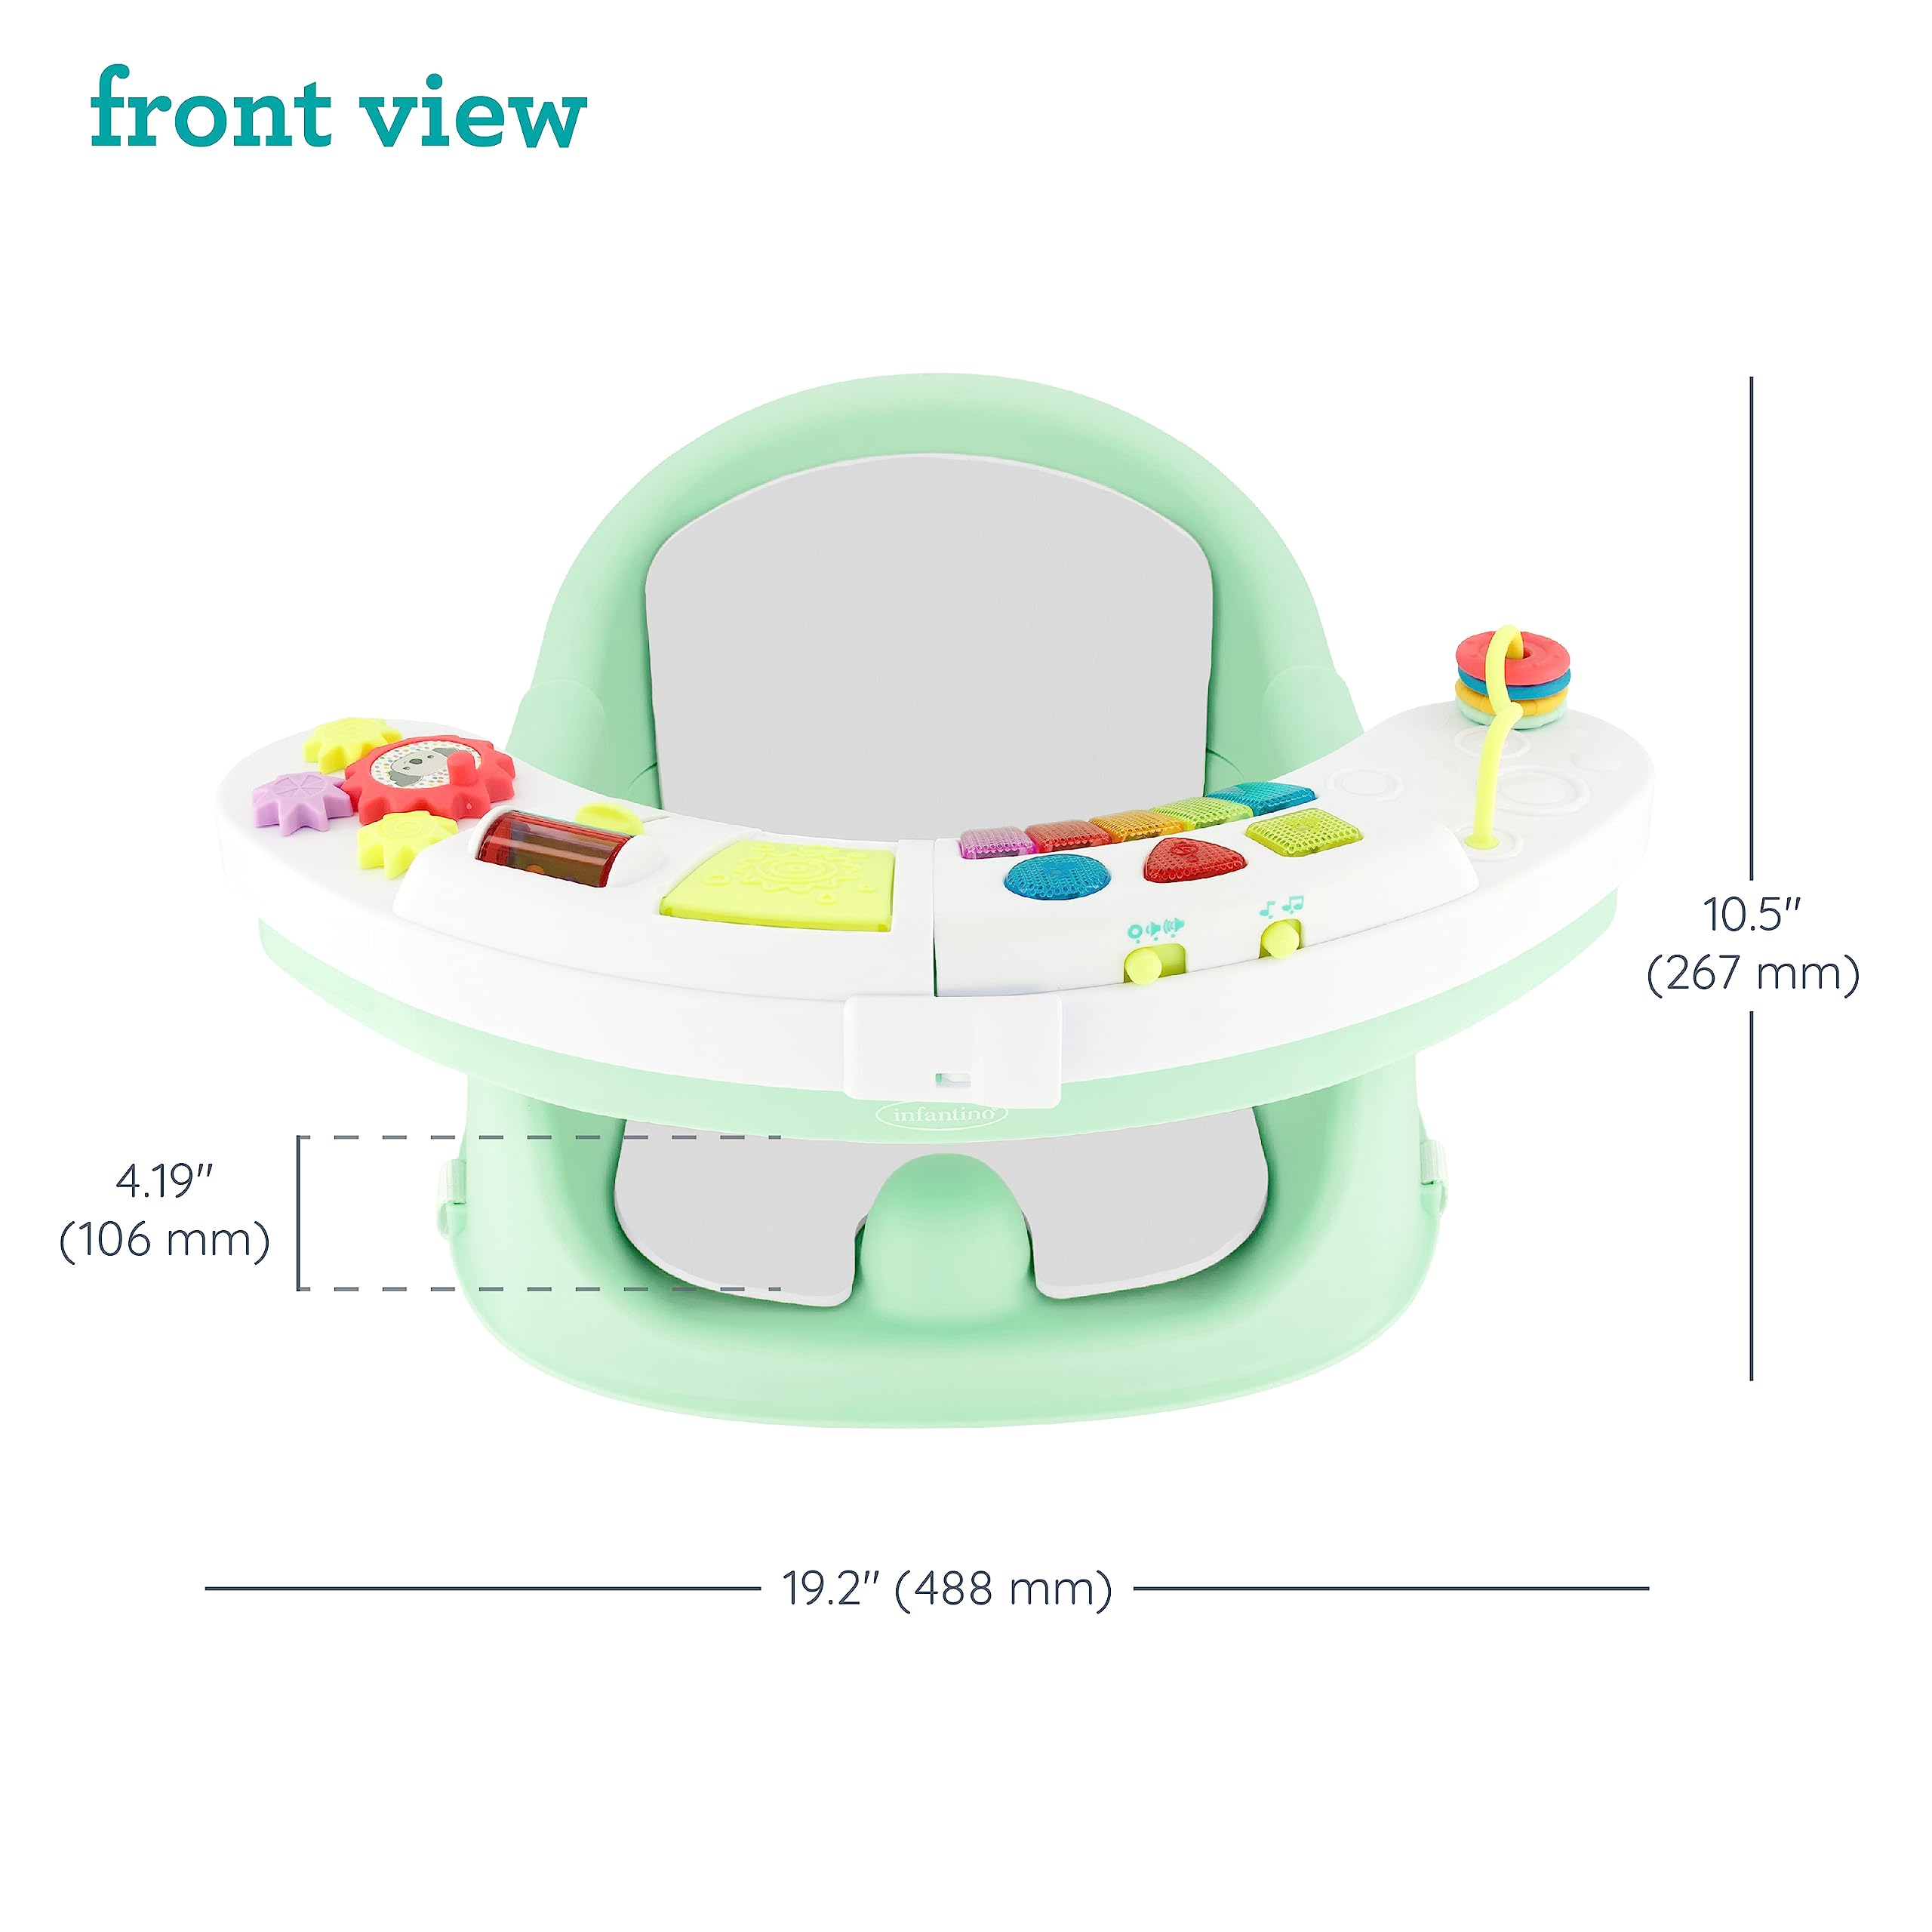 Infantino Music & Lights 3-in-1 Discovery Seat and Booster - Convertible, Infant Activity and Feeding Seat with Electronic Piano for Sensory Exploration, for Babies and Toddlers, Mint